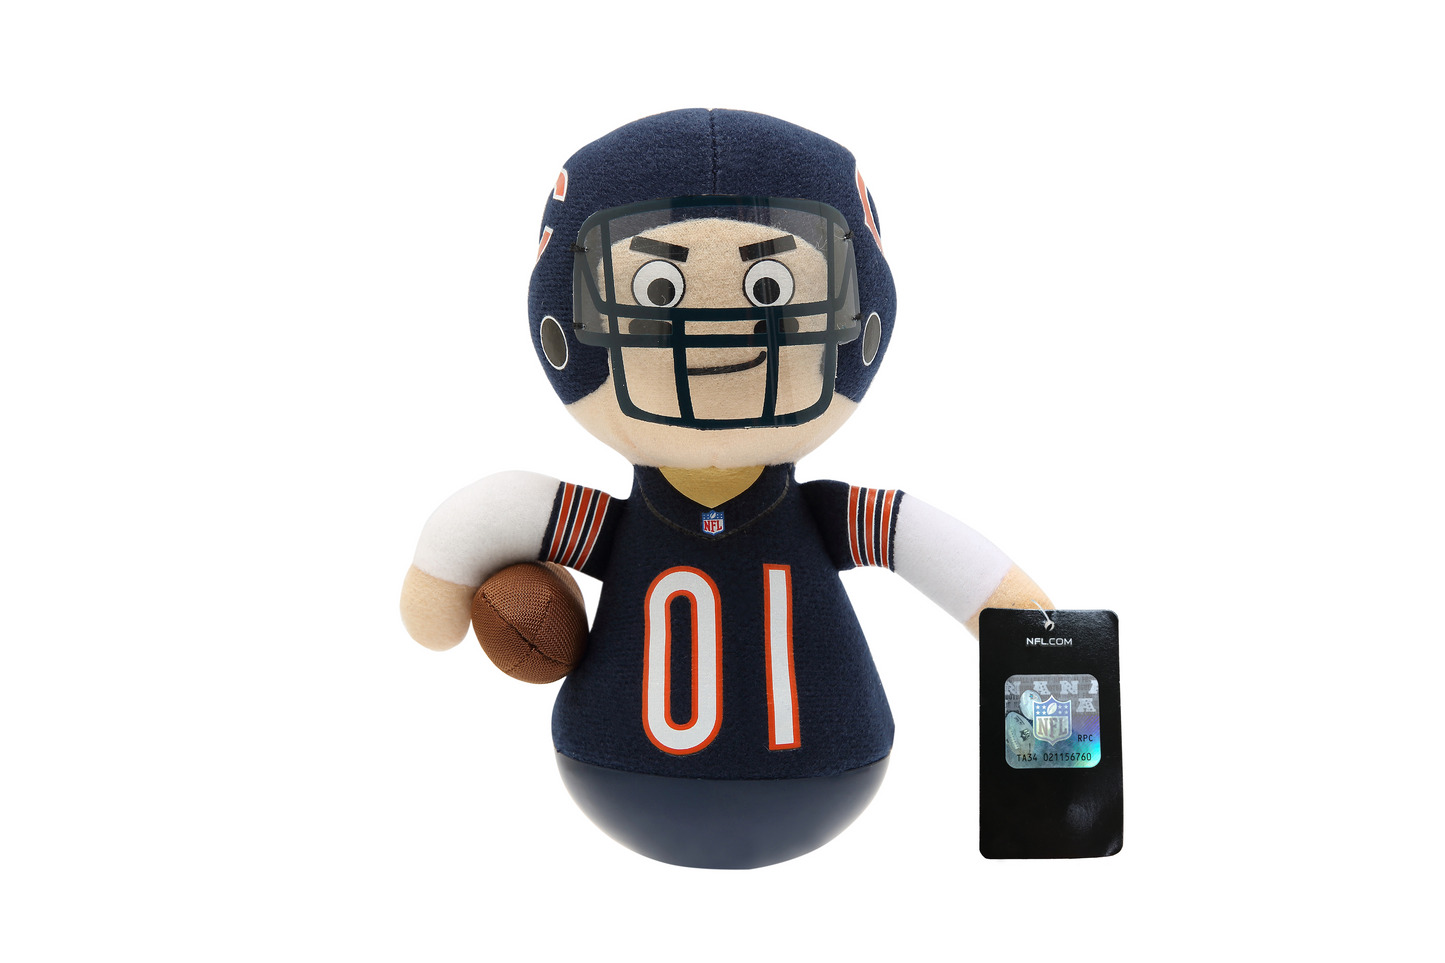 NFL Rock'emz Collectible Sports Figurine - 7 in. tall (Chicago Bears)